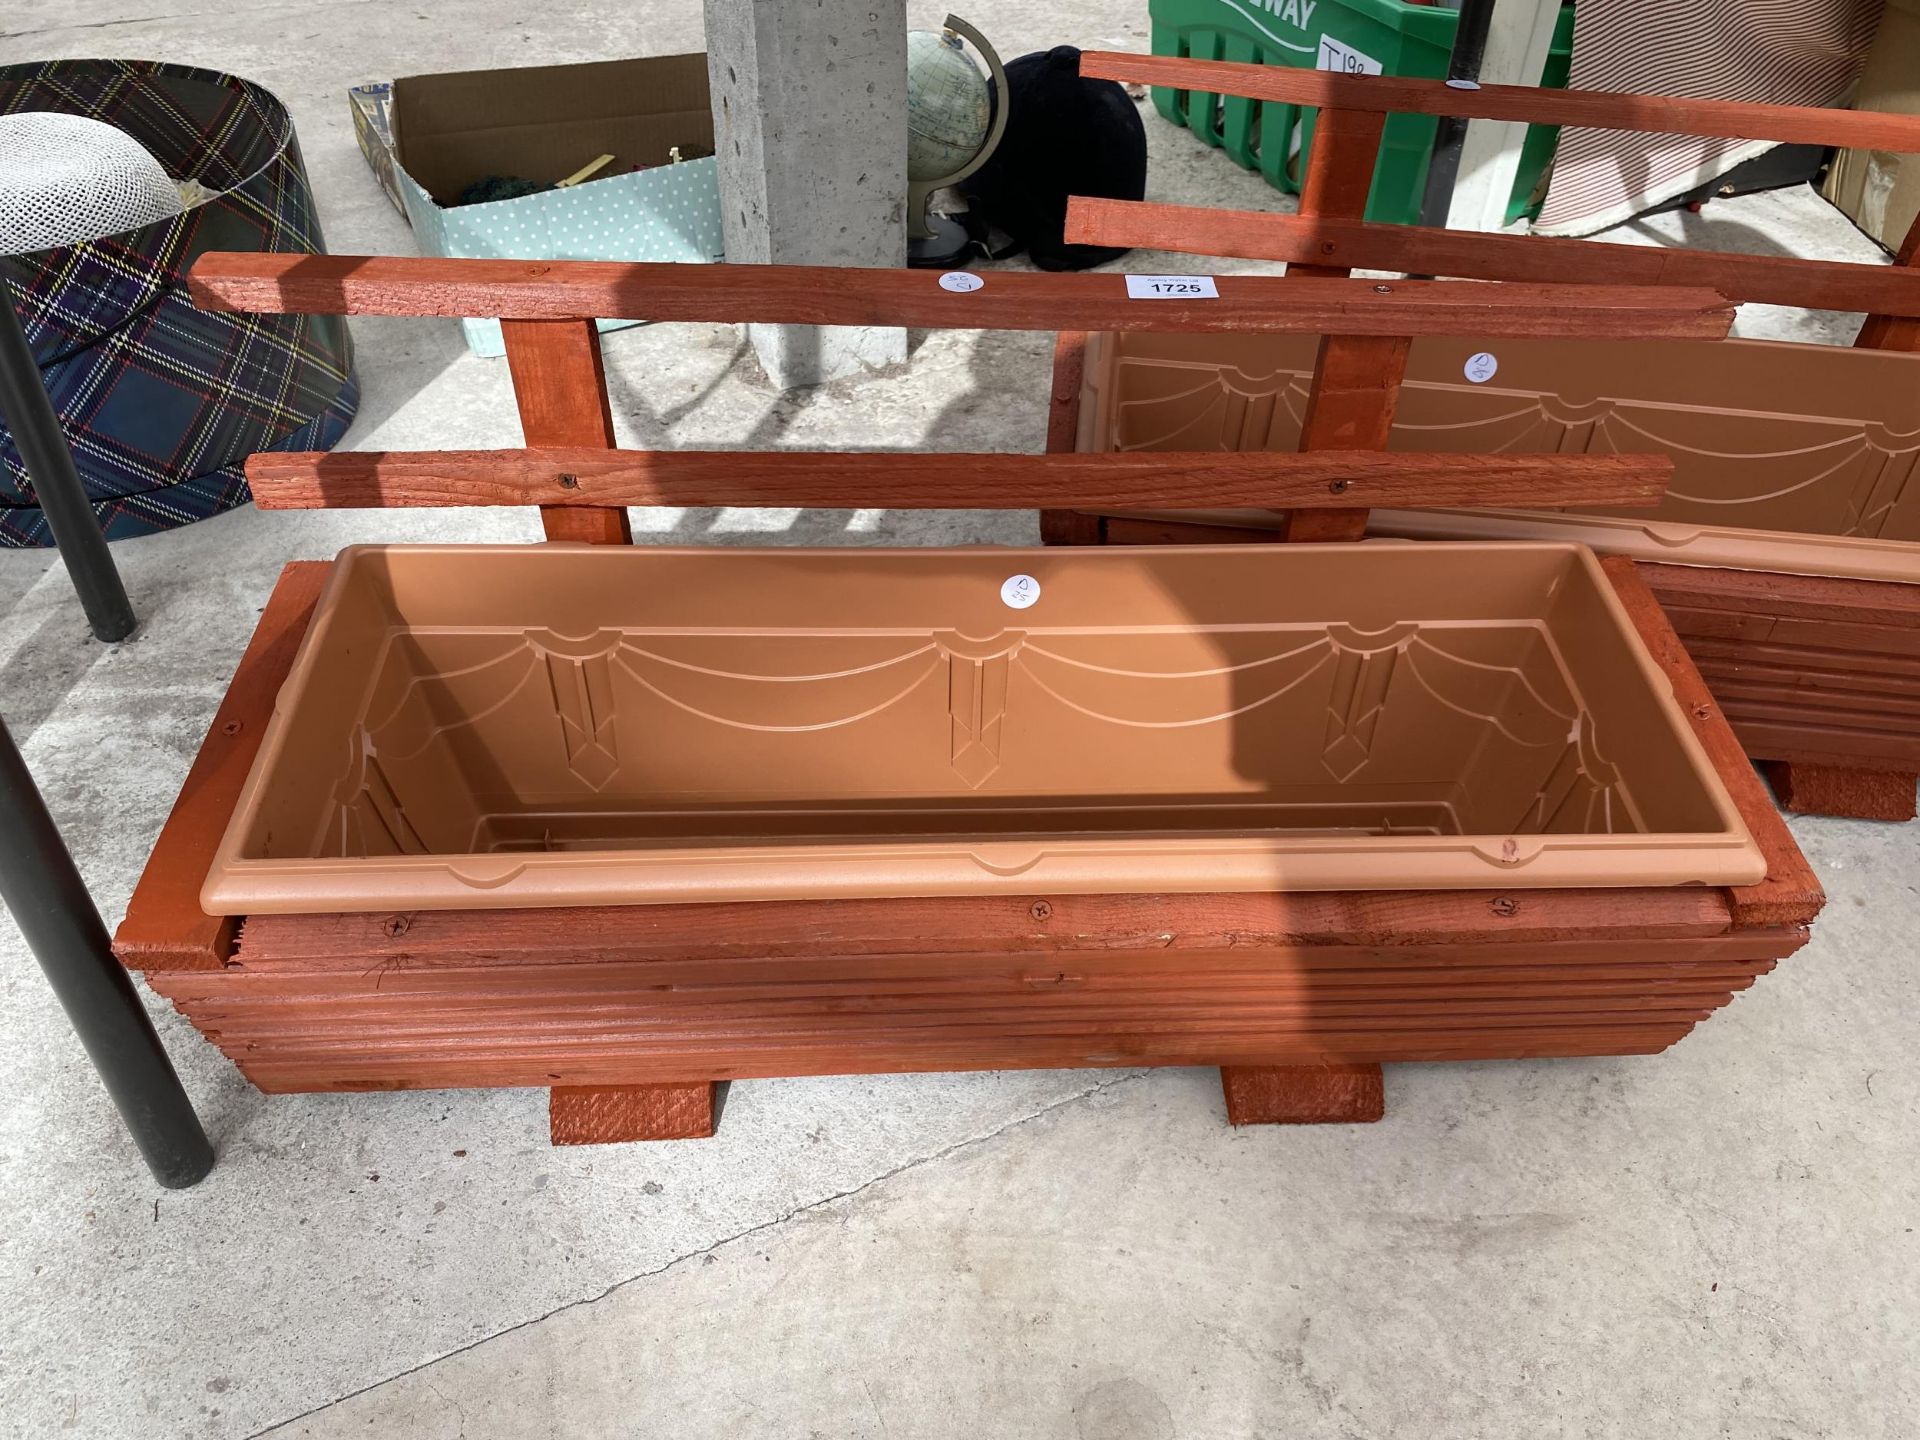 TWO WOODEN TROUGH PLANTERS WITH PLASTIC INSERTS AND TRELIS BACKS - Image 2 of 3